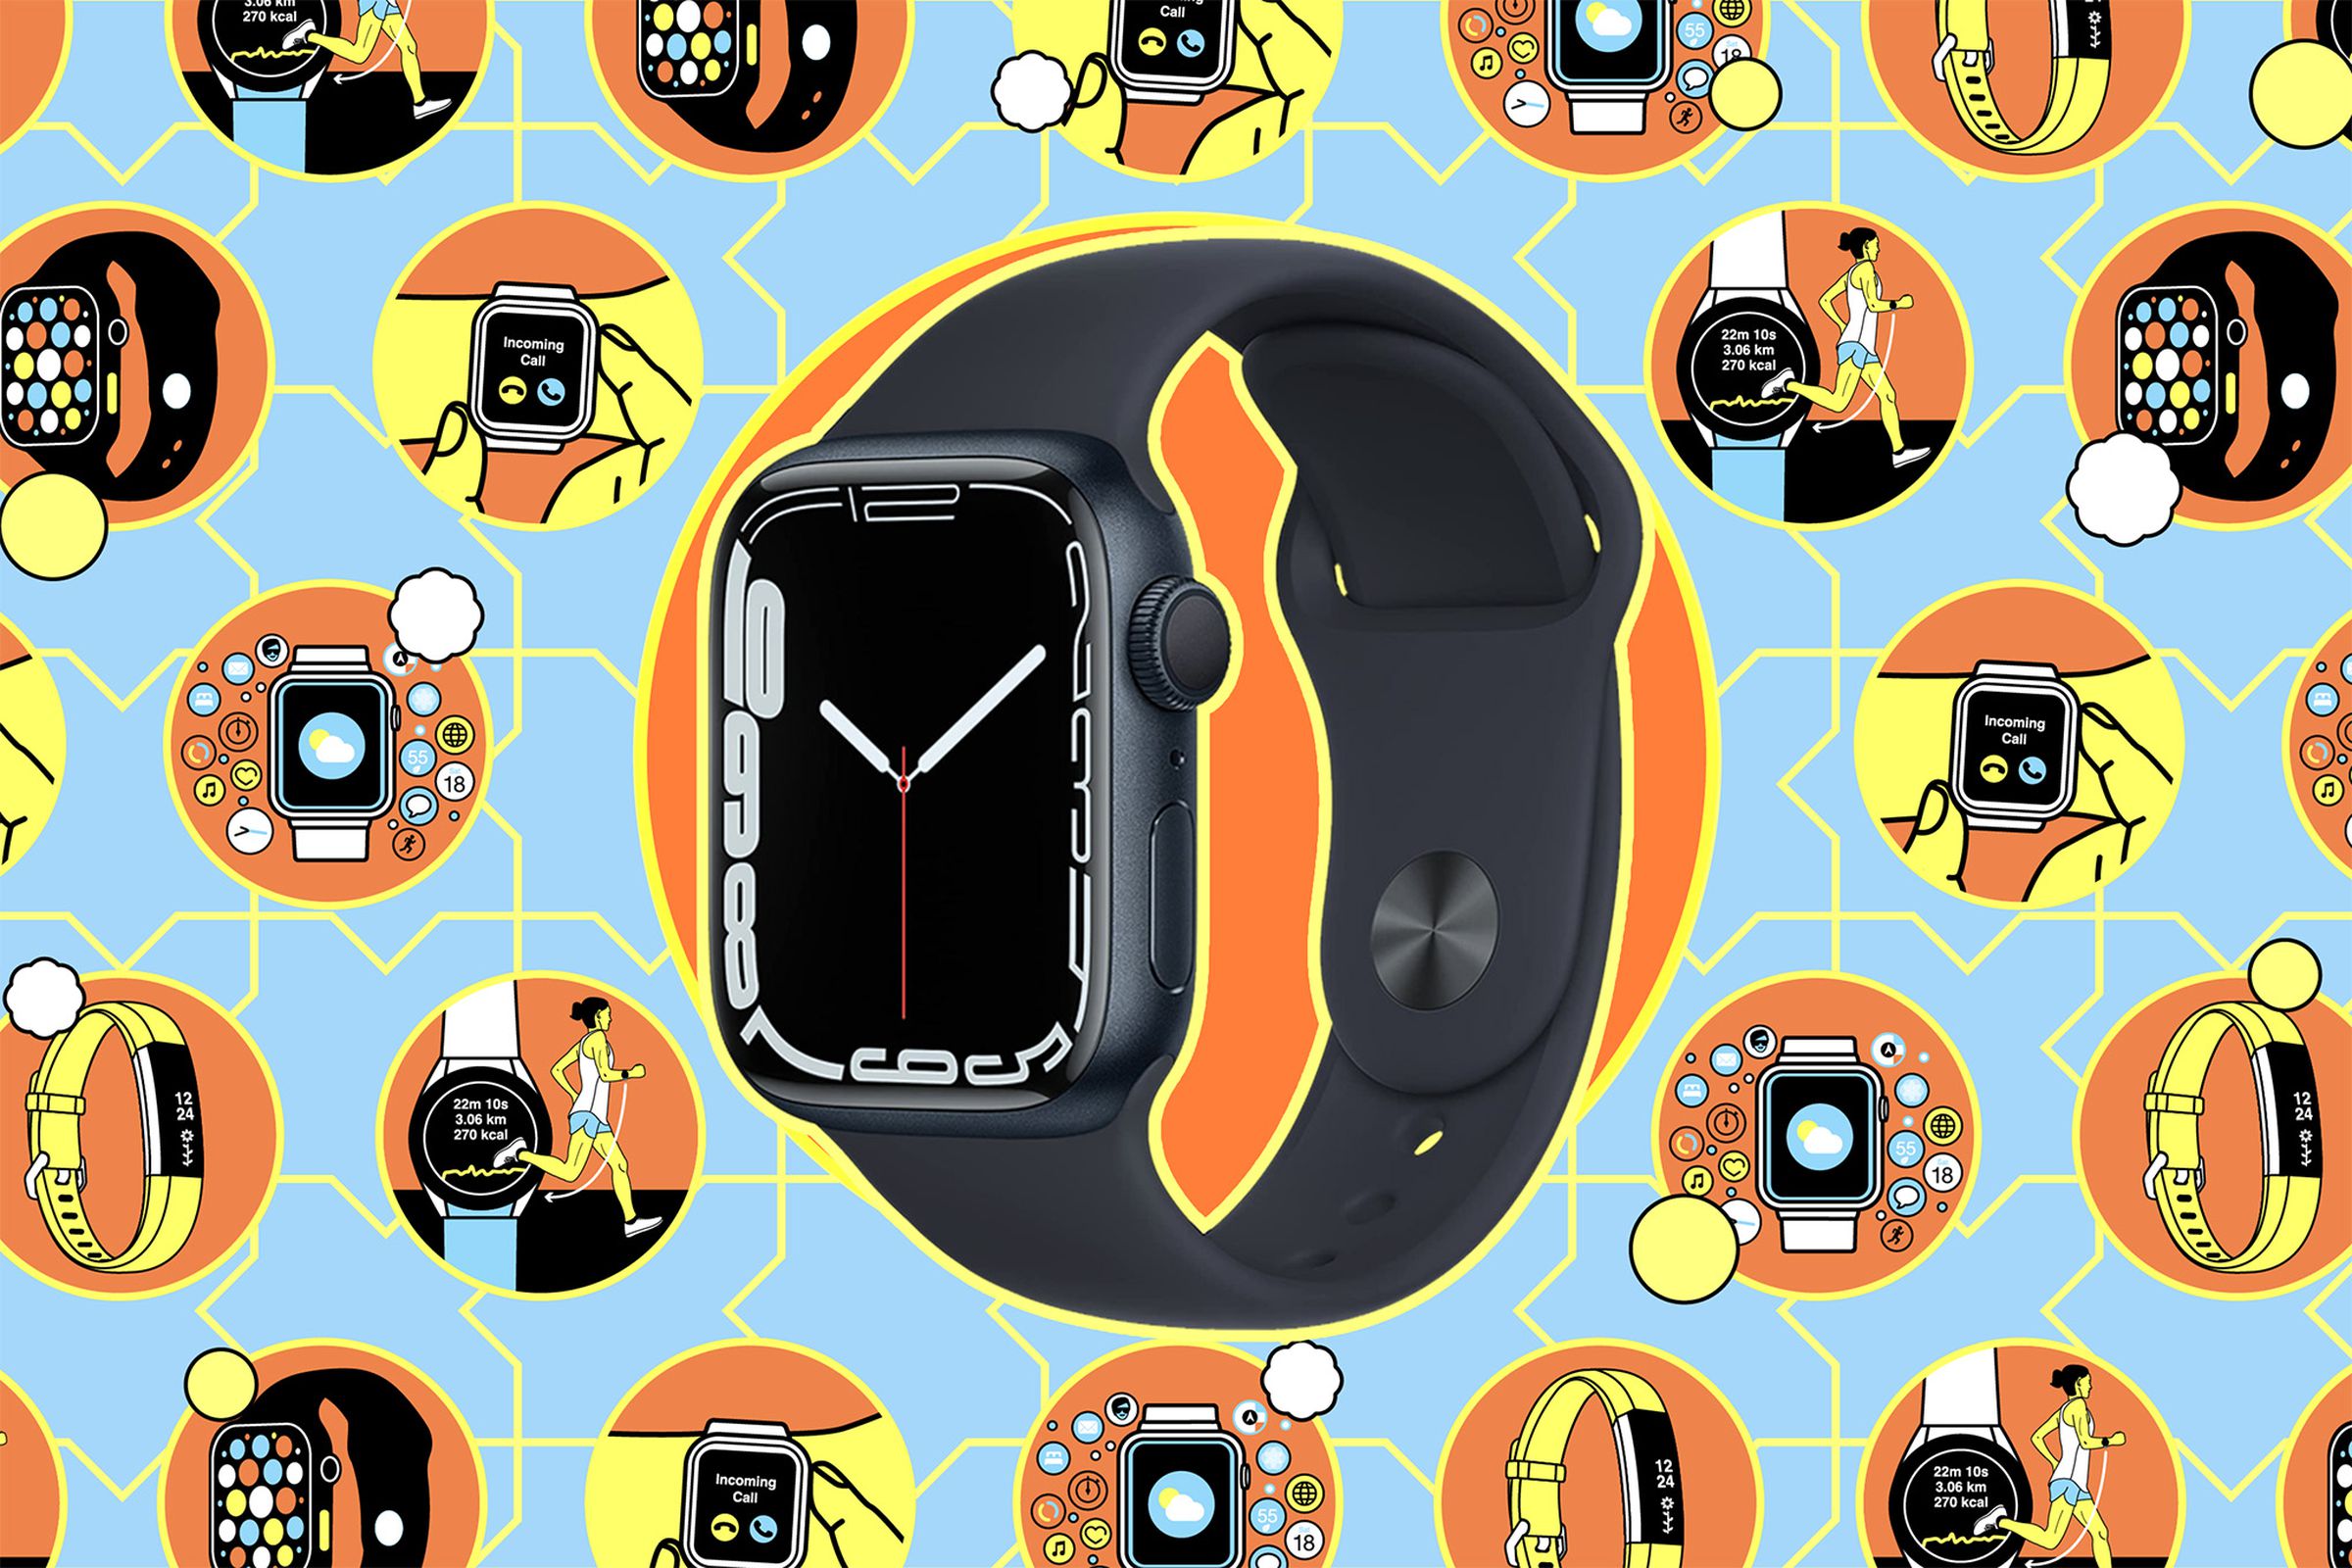 Apple Watch set against a colorful background of illustrations showing various activities involving smartwatches.